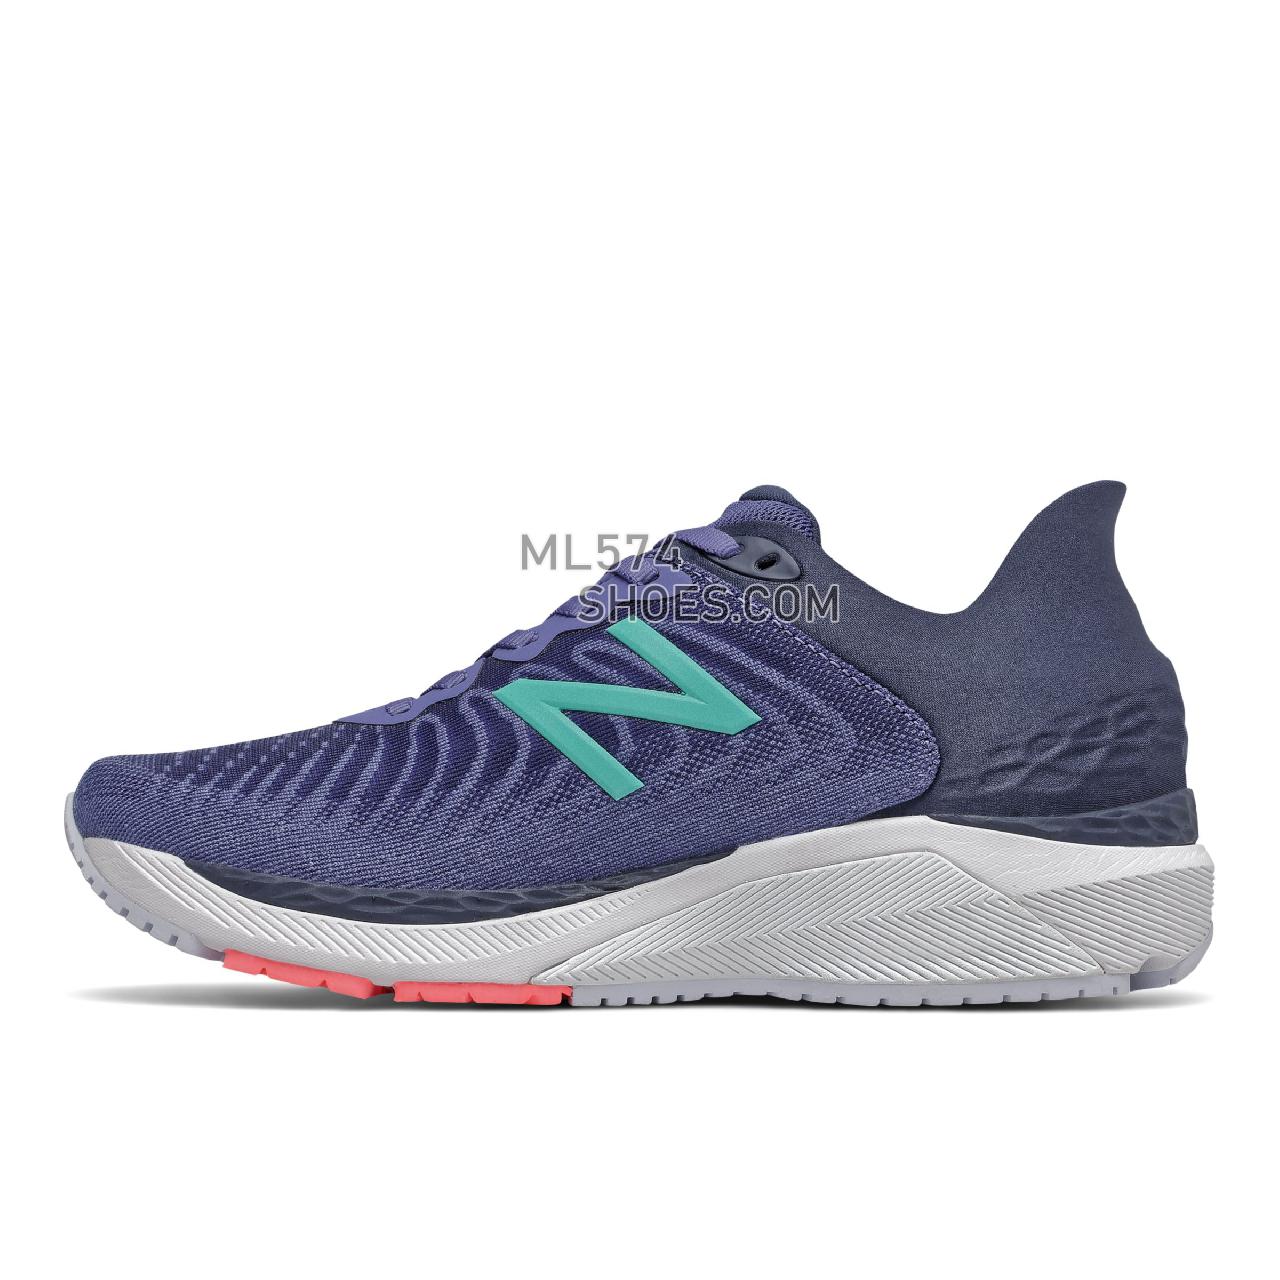 New Balance Fresh Foam 860v11 - Women's Stability Running - Magnetic Blue with Natural Indigo and Tidepool - W860F11